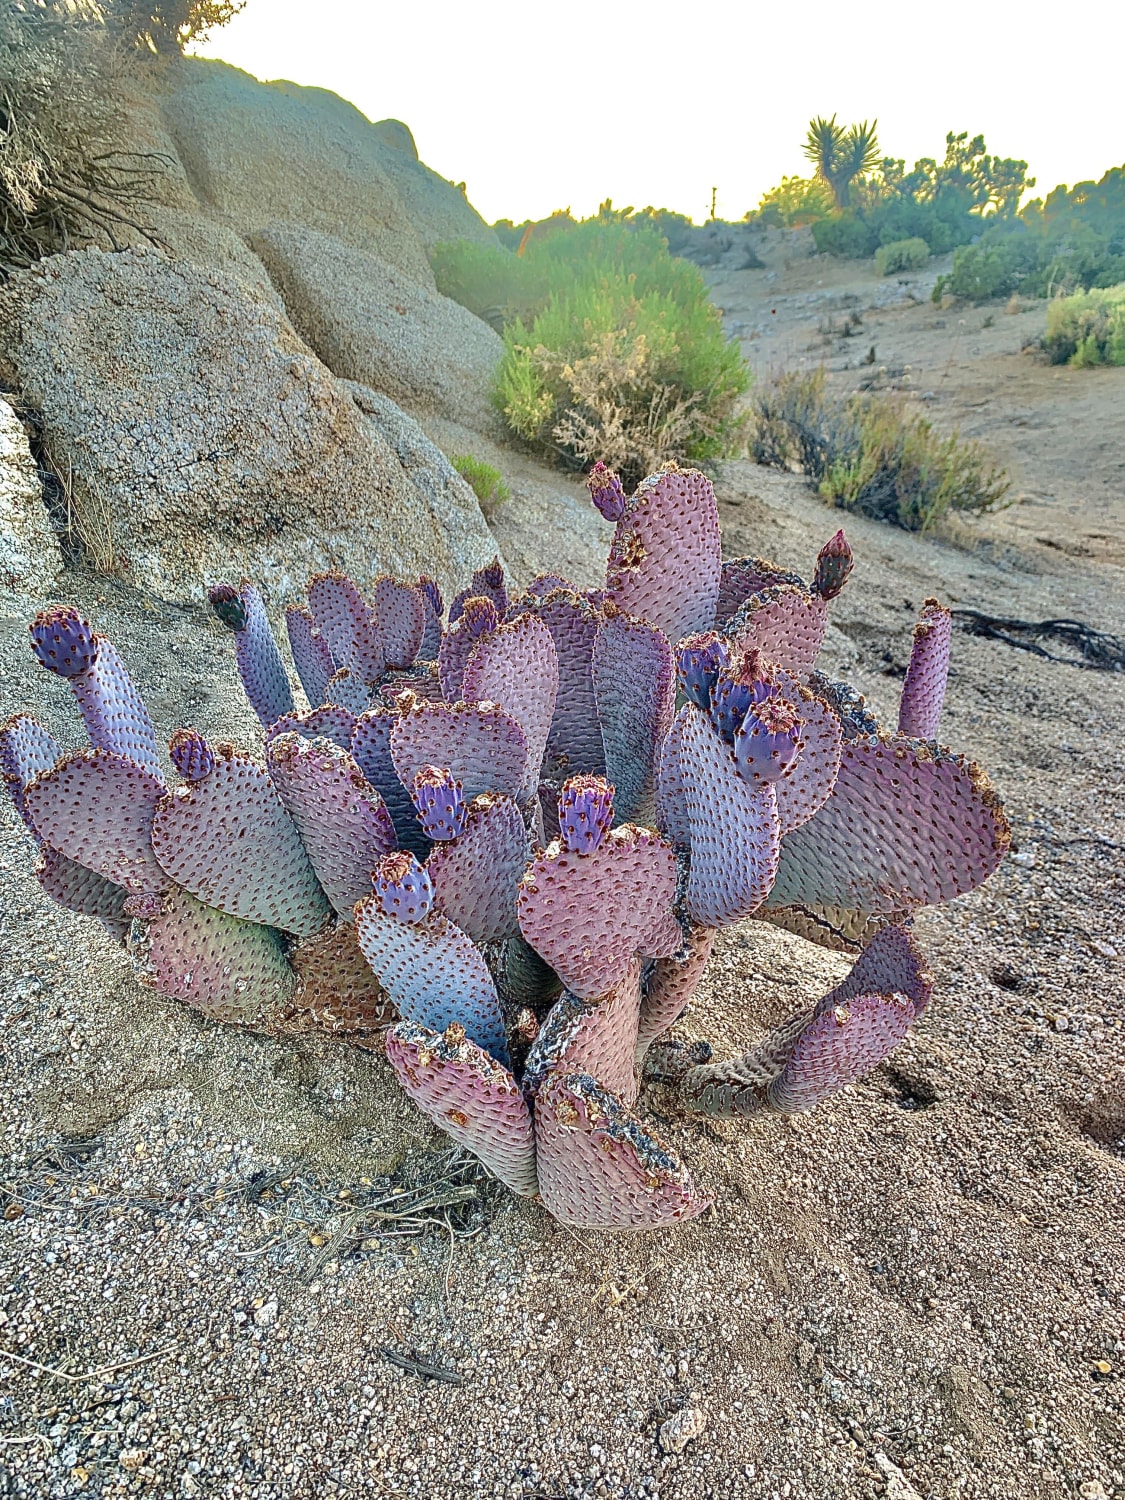 Can’t stop thinking about these cacti I saw in Joshua Tree 💜